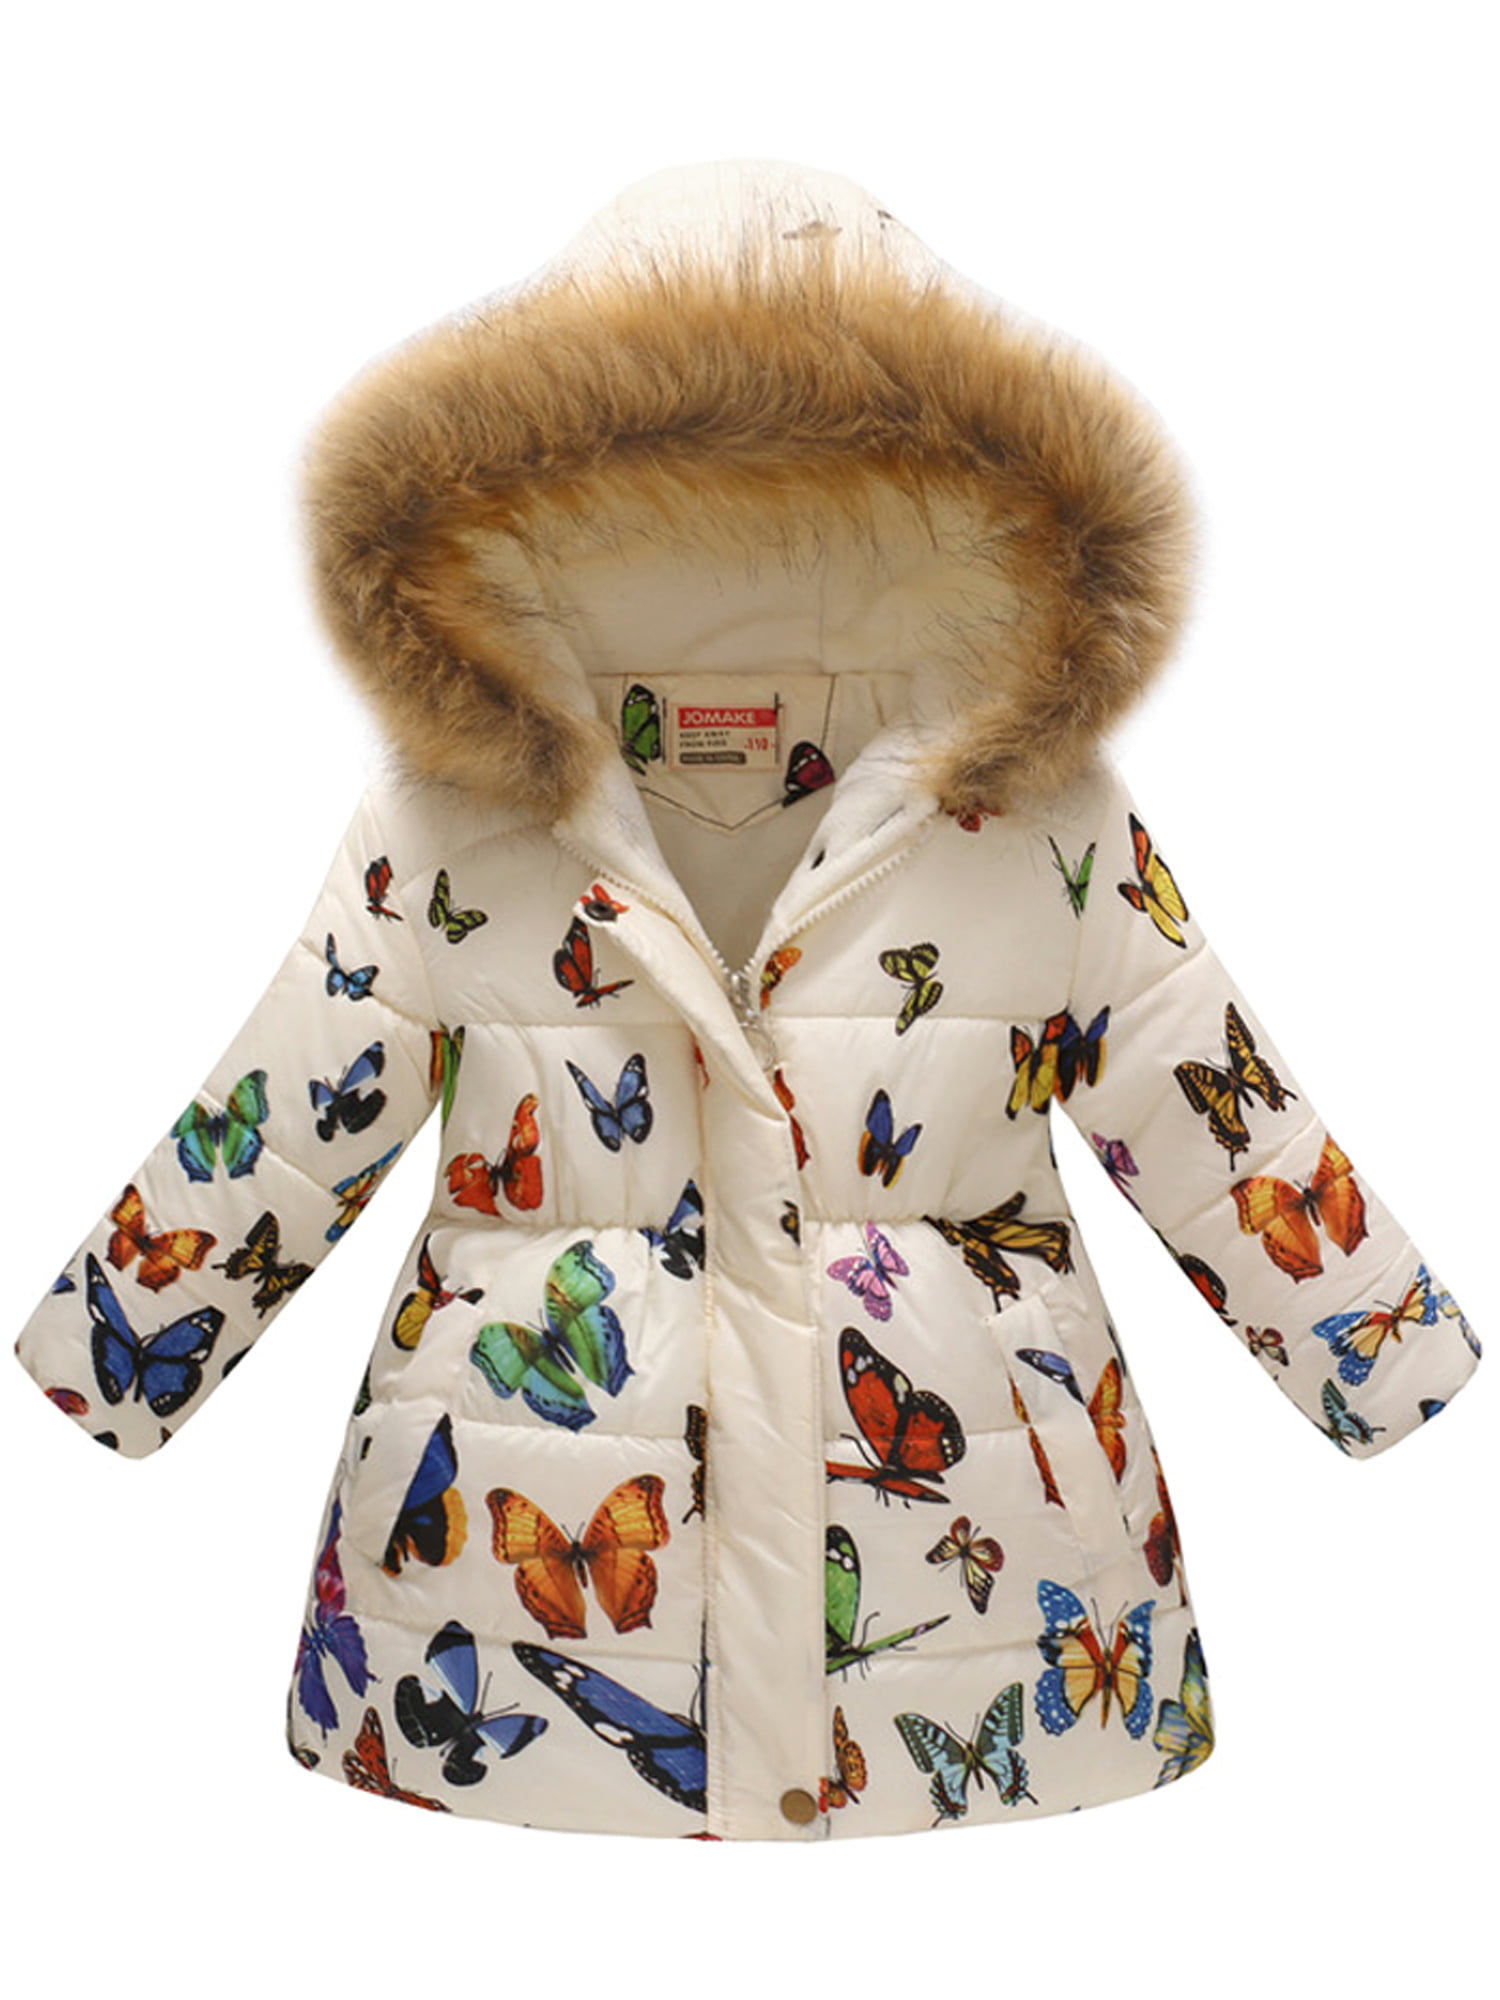 Clearance/Warm Coat for 3-8 Years Toddler Baby Girl Boy Floral Butterfly Winter Hooded Windproof Jacket Hoodie